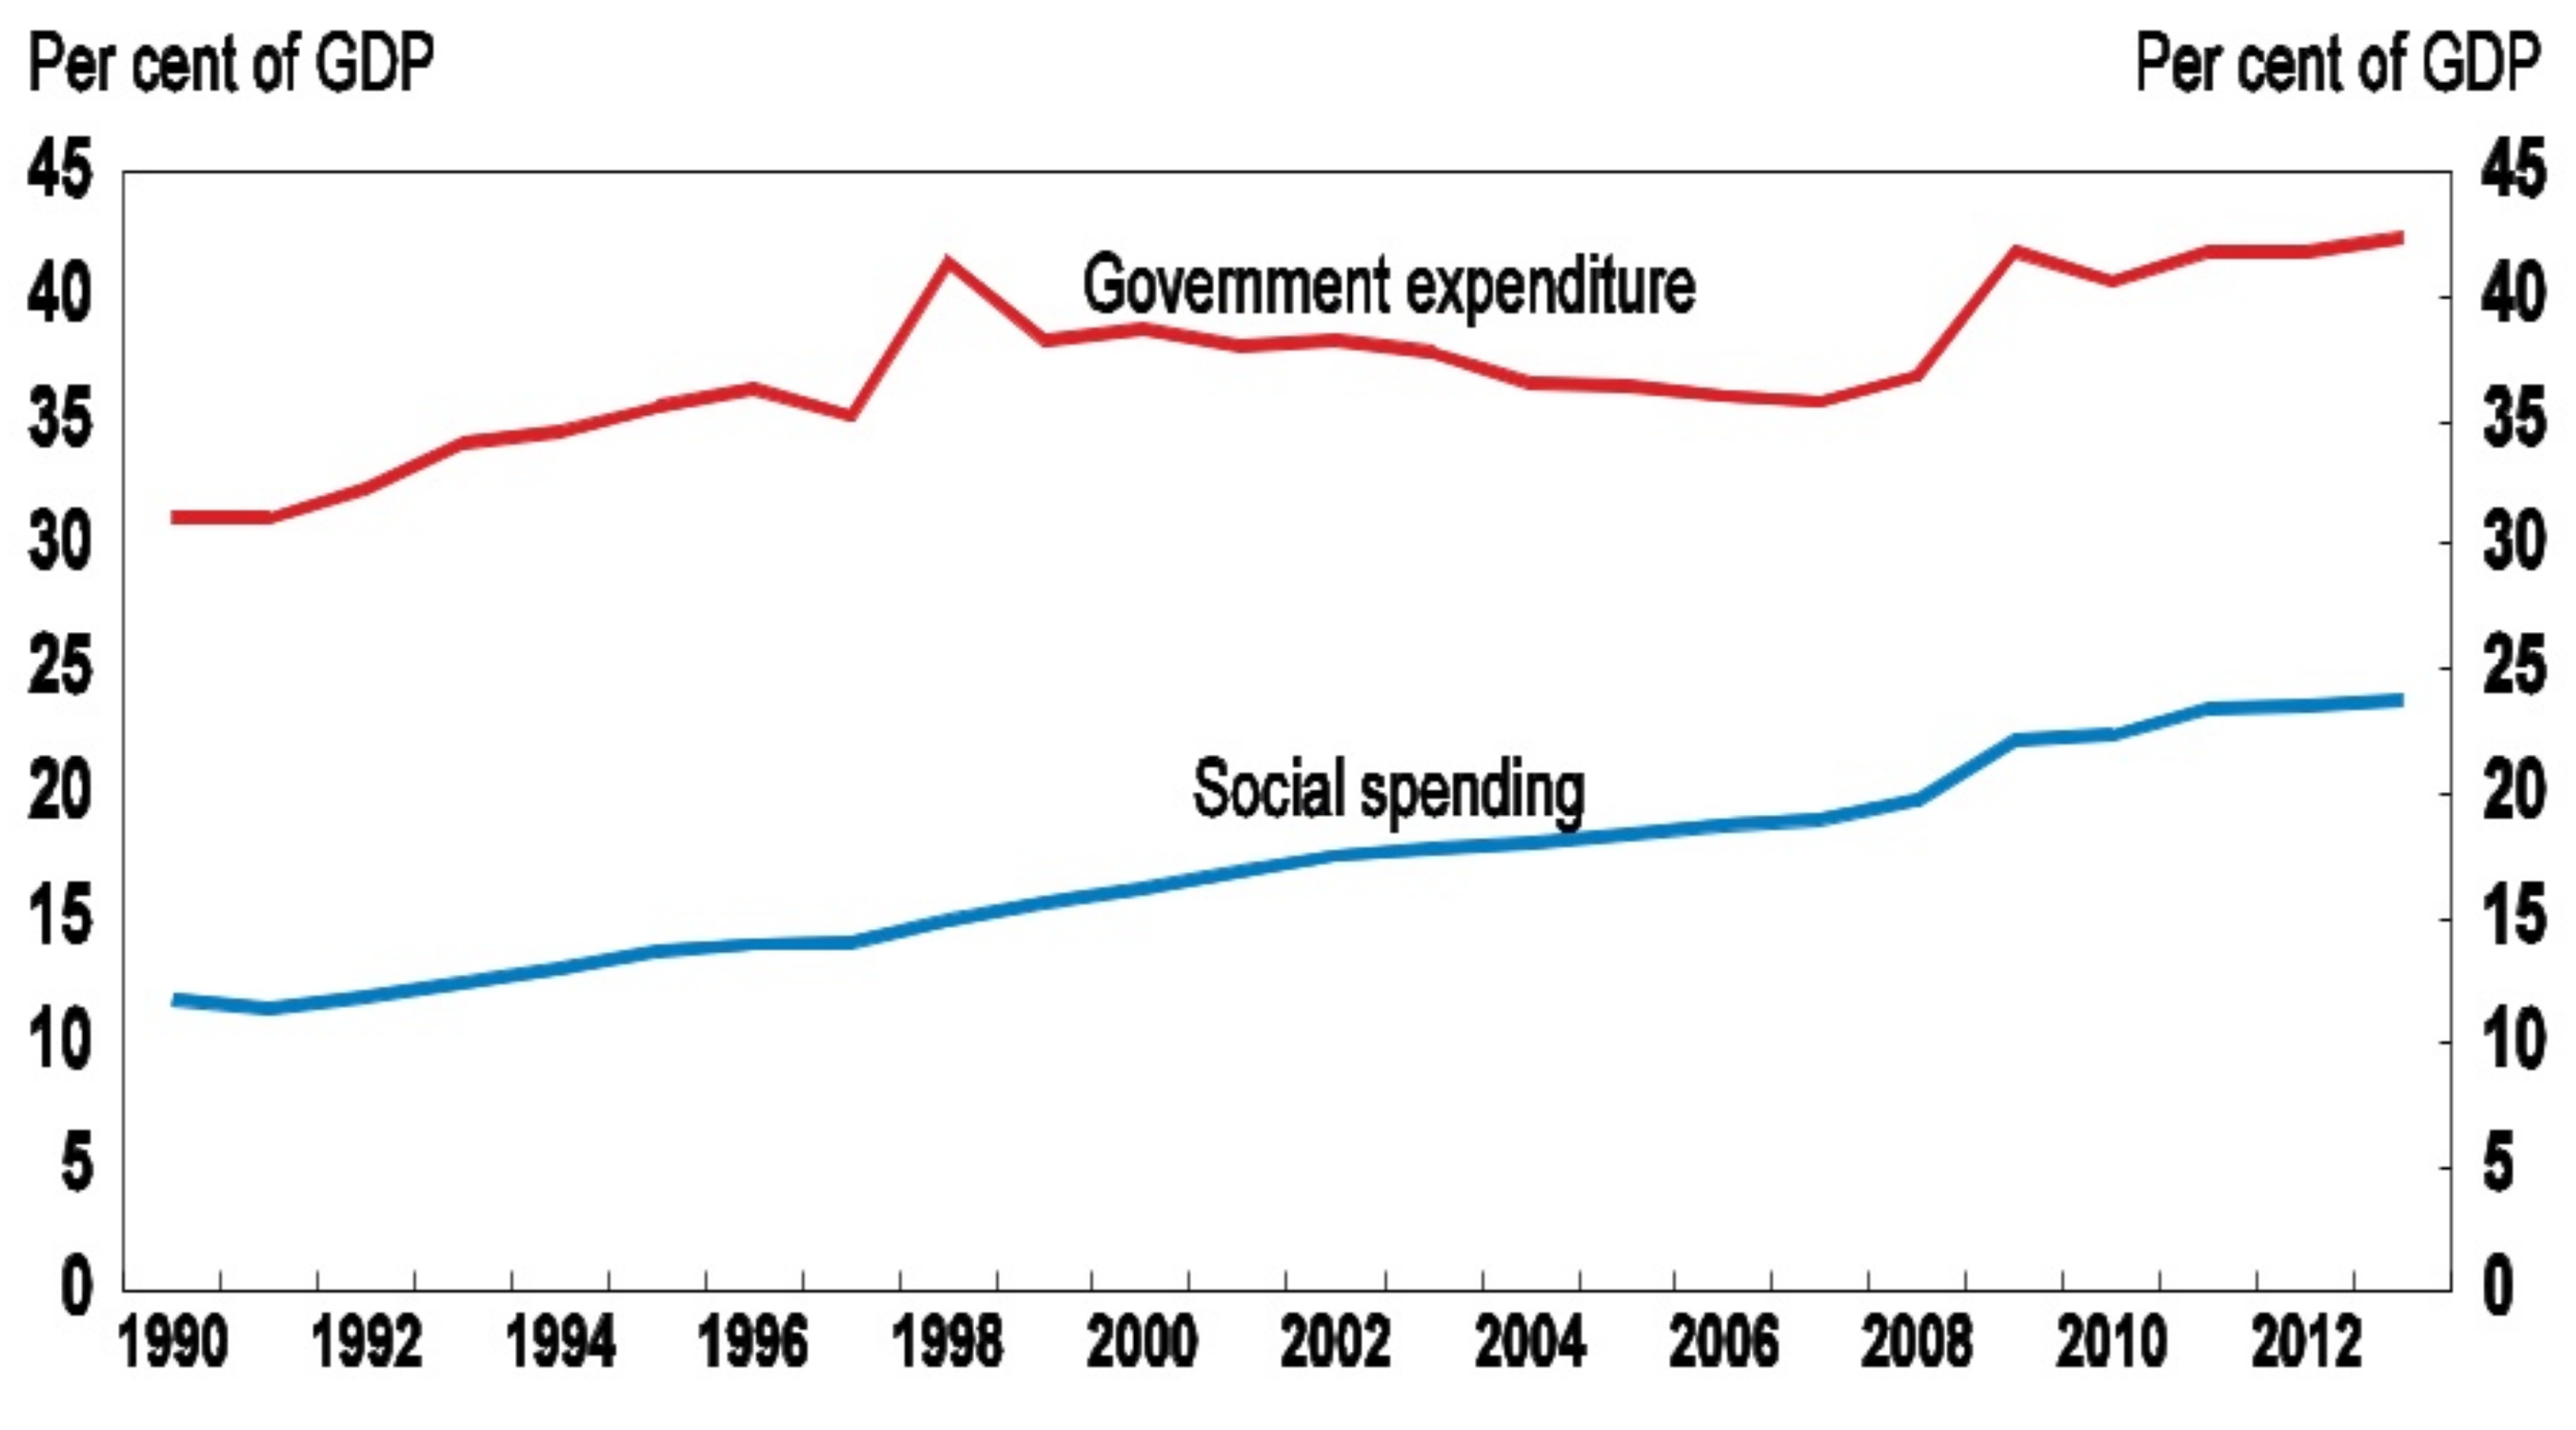 Social Spending As % GDP, Japan (Fiscal Policy)